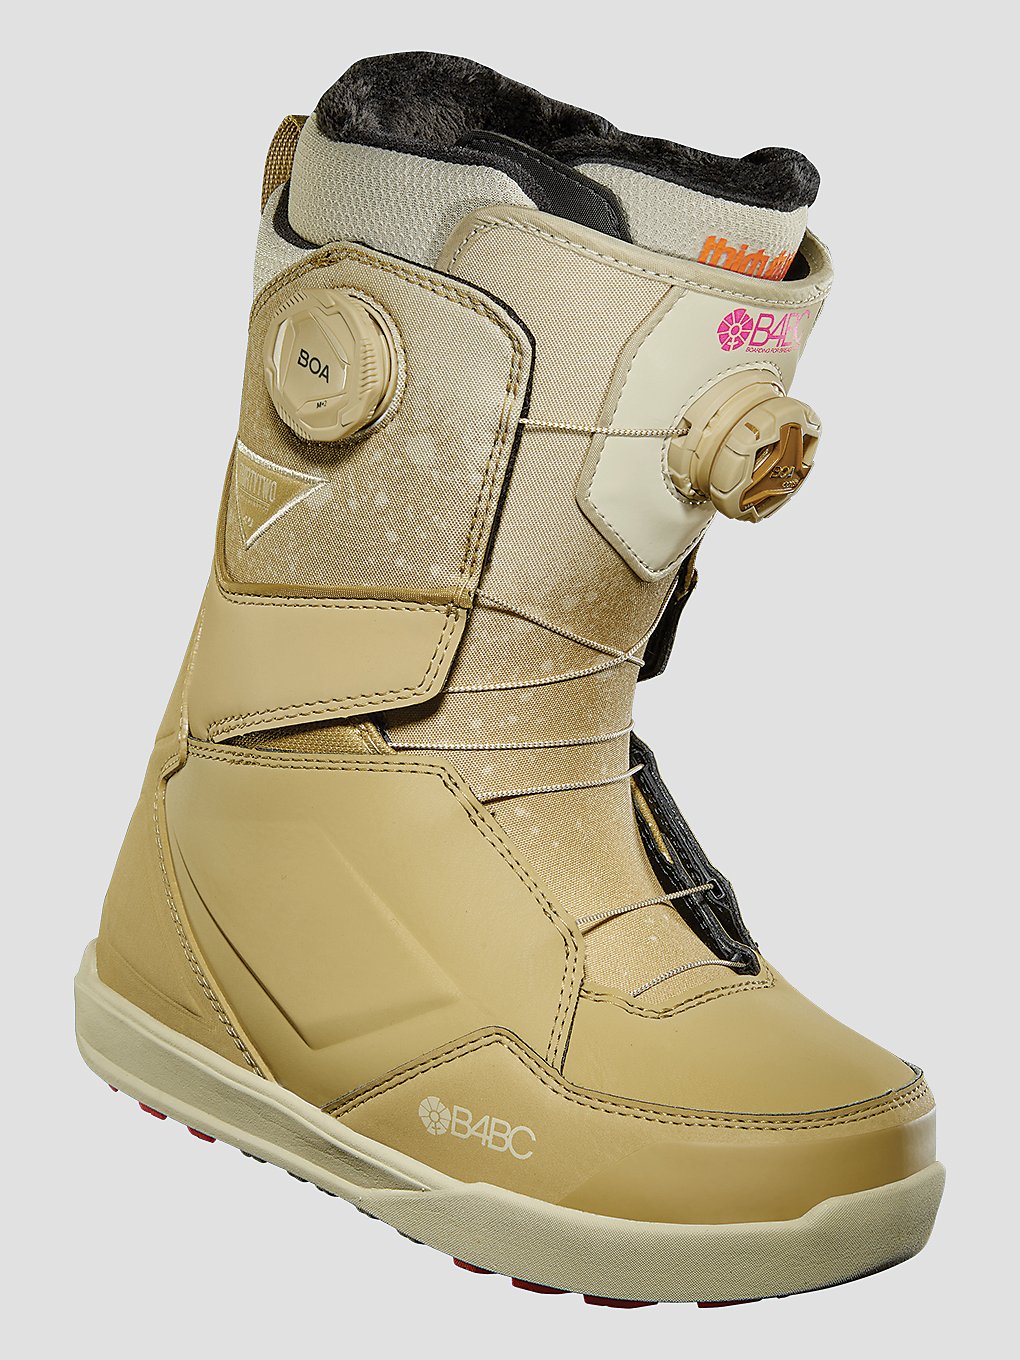 thirtytwo lashed double boa b4bc 2024 snowboard-boots tan